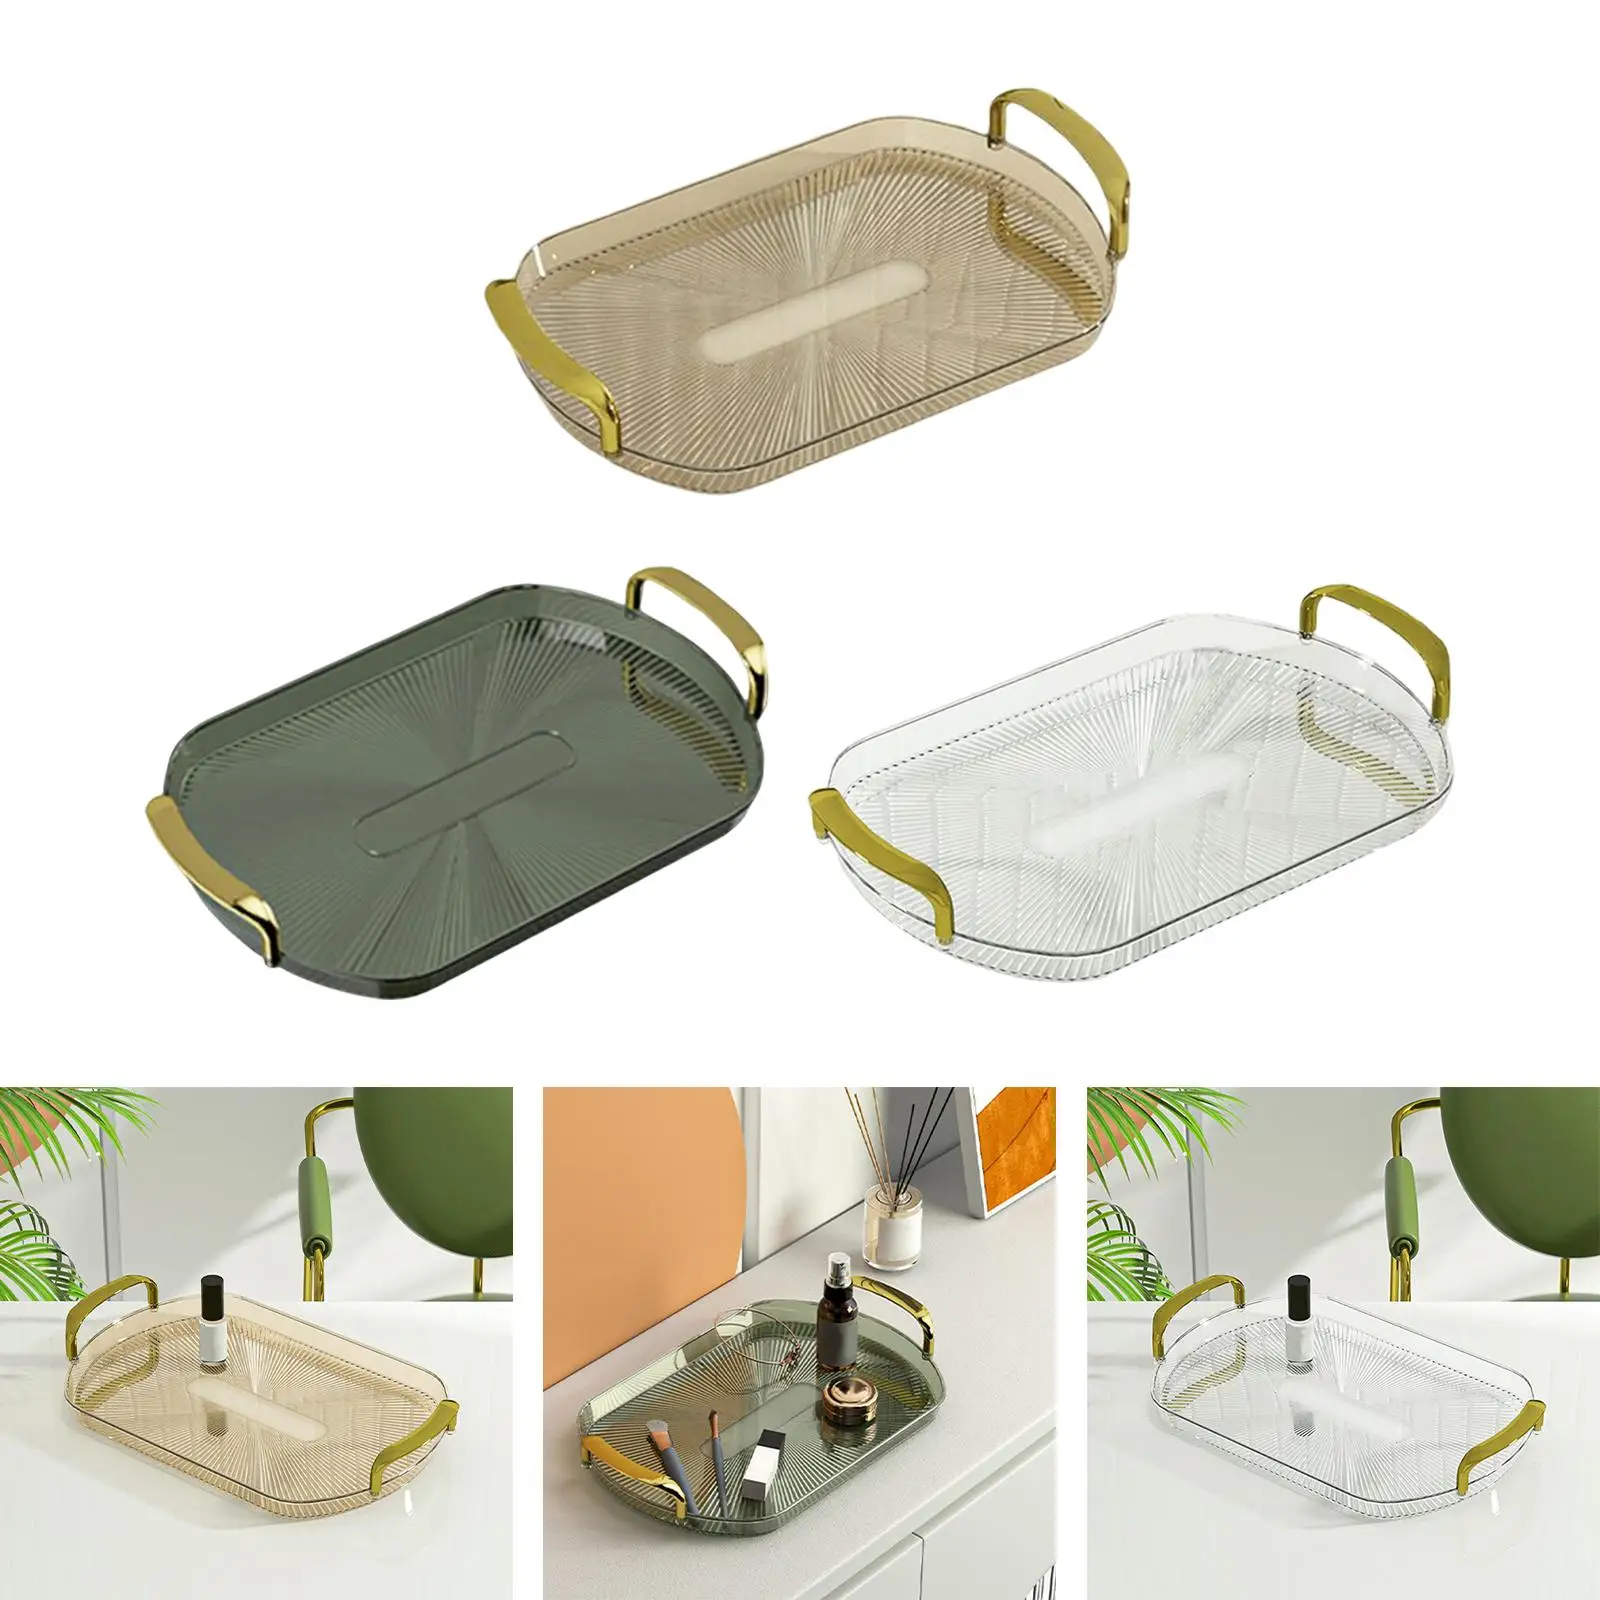 Versatile Serving Tray with Golden Handles for Kitchen, Bathroom, Makeup Tray Durable Decorative Universal Multi Use